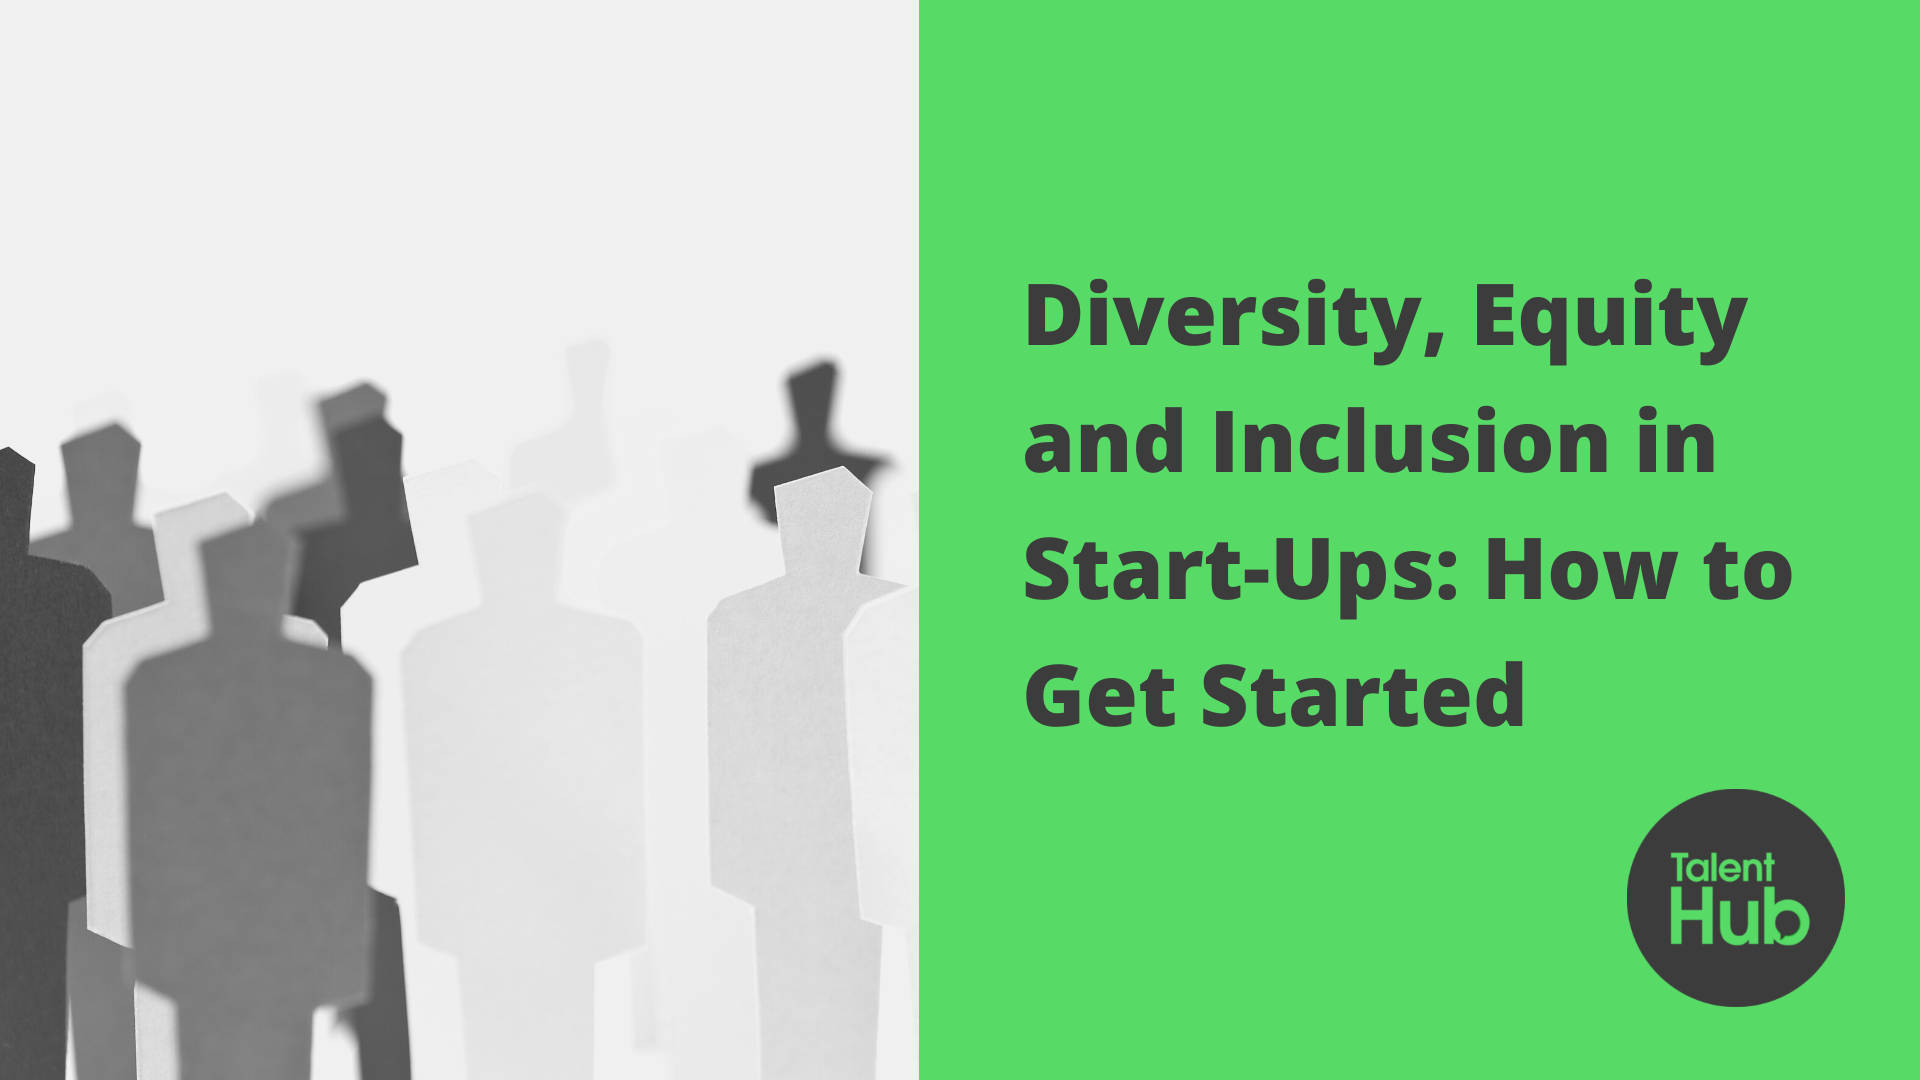 Diversity, Equity and Inclusion in Start-Ups: How to Get Started